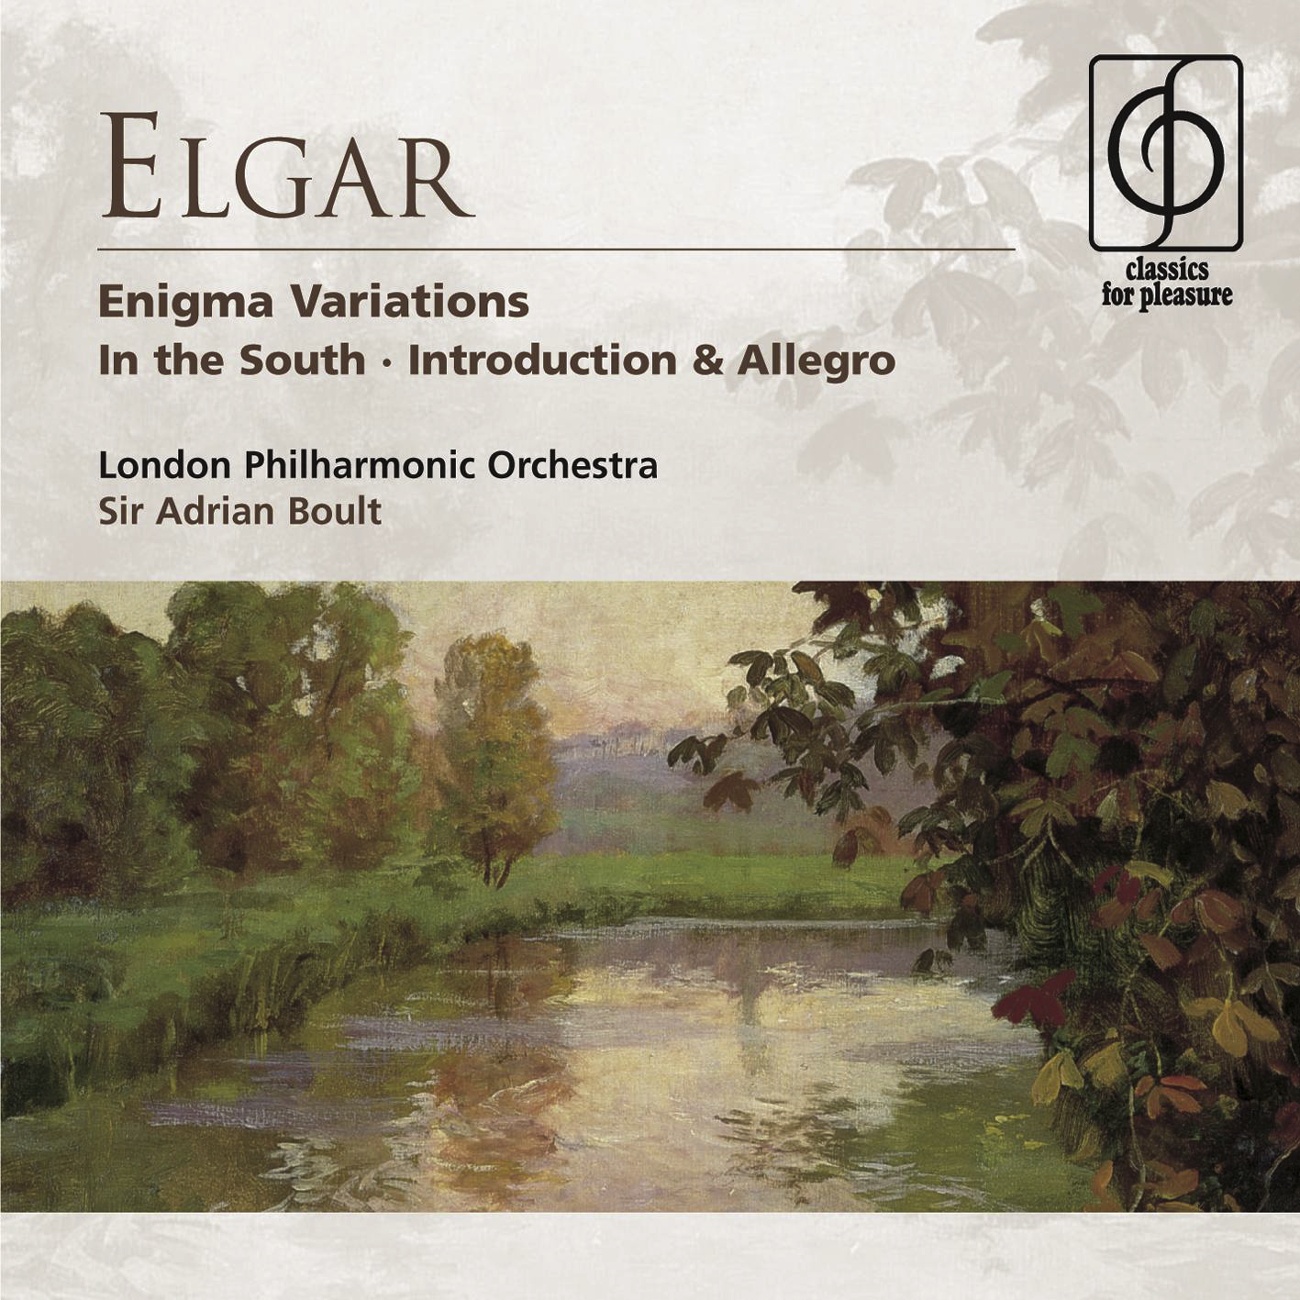 Variations on an Original Theme 'Enigma' Op. 36 (1991 Digital Remaster): Theme (Andante)